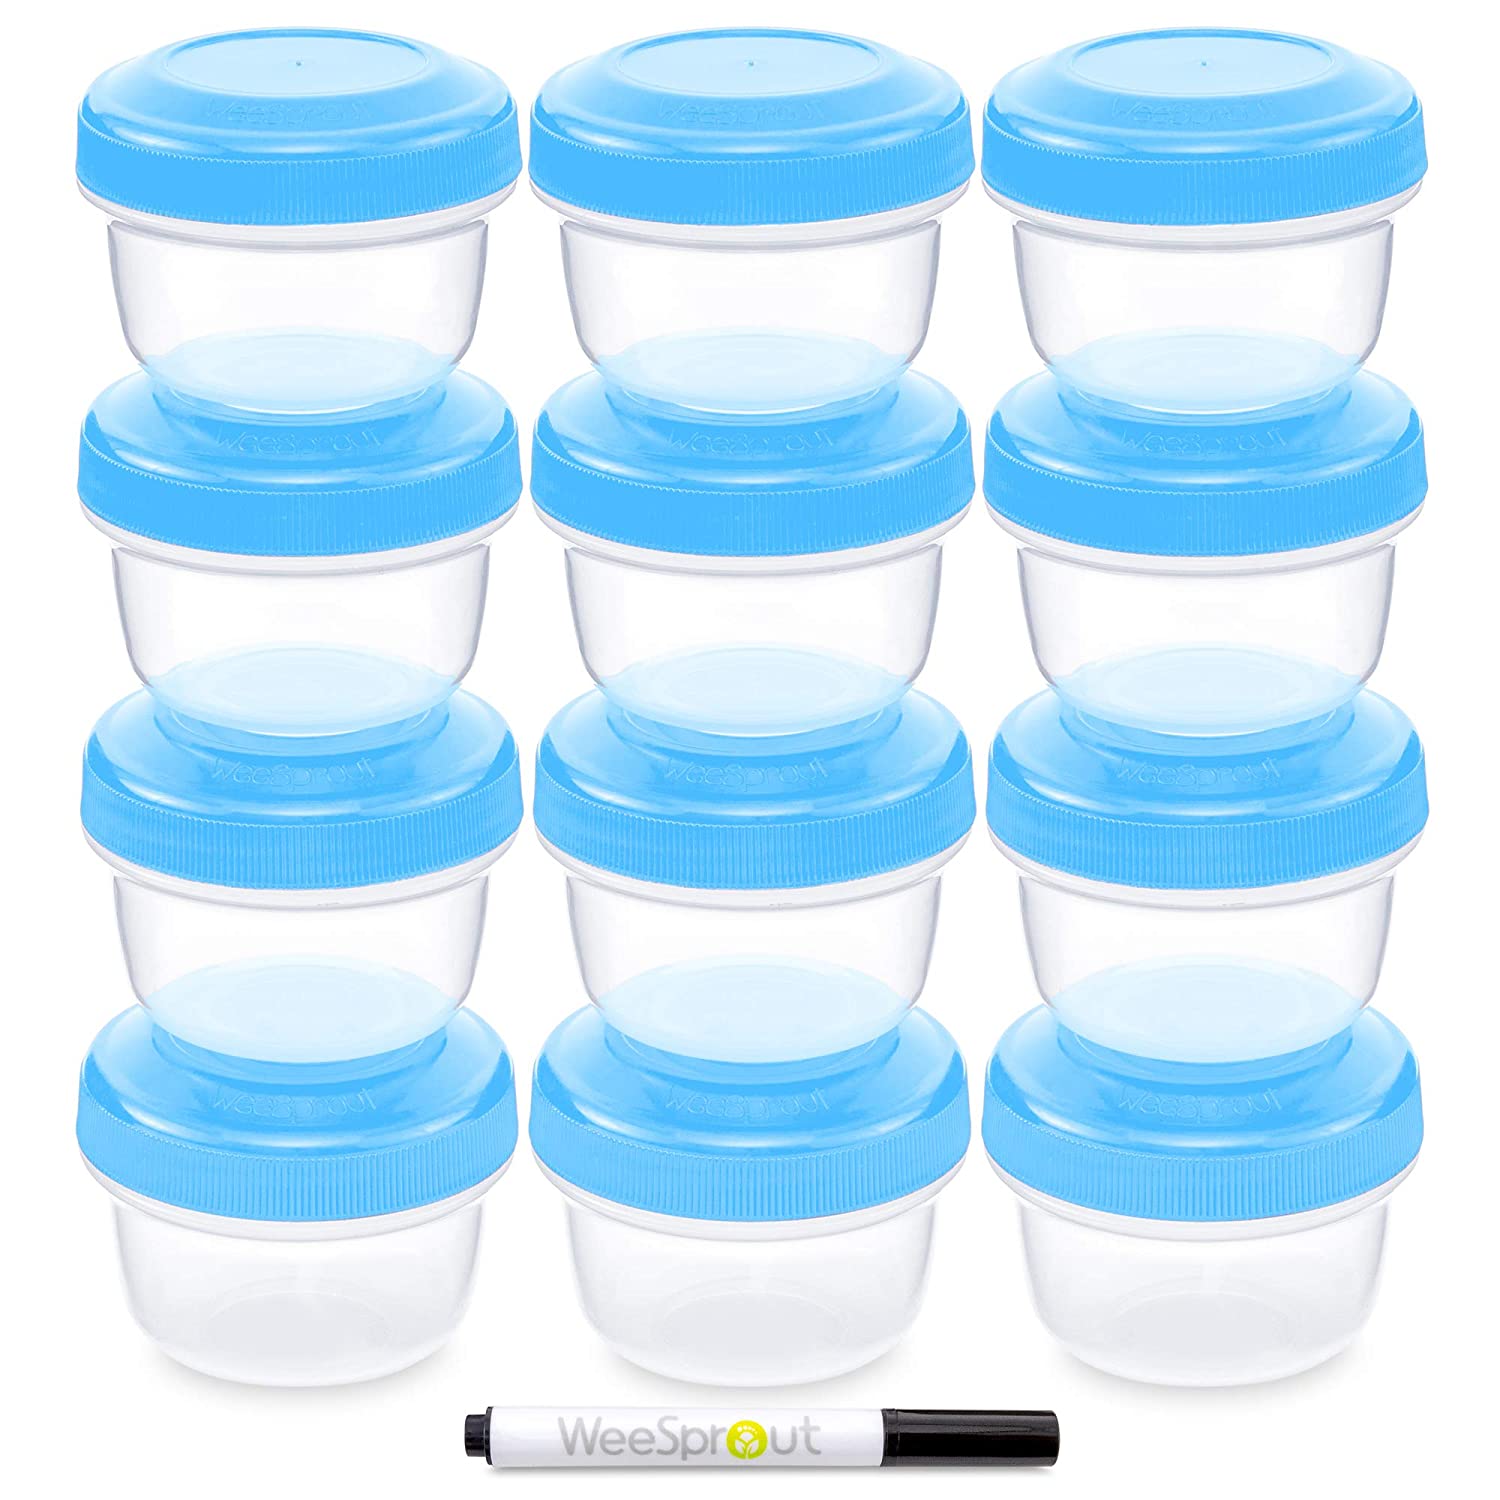 WeeSprout Baby Food Storage Containers | Set of 12 Small Reusable 4oz Jars